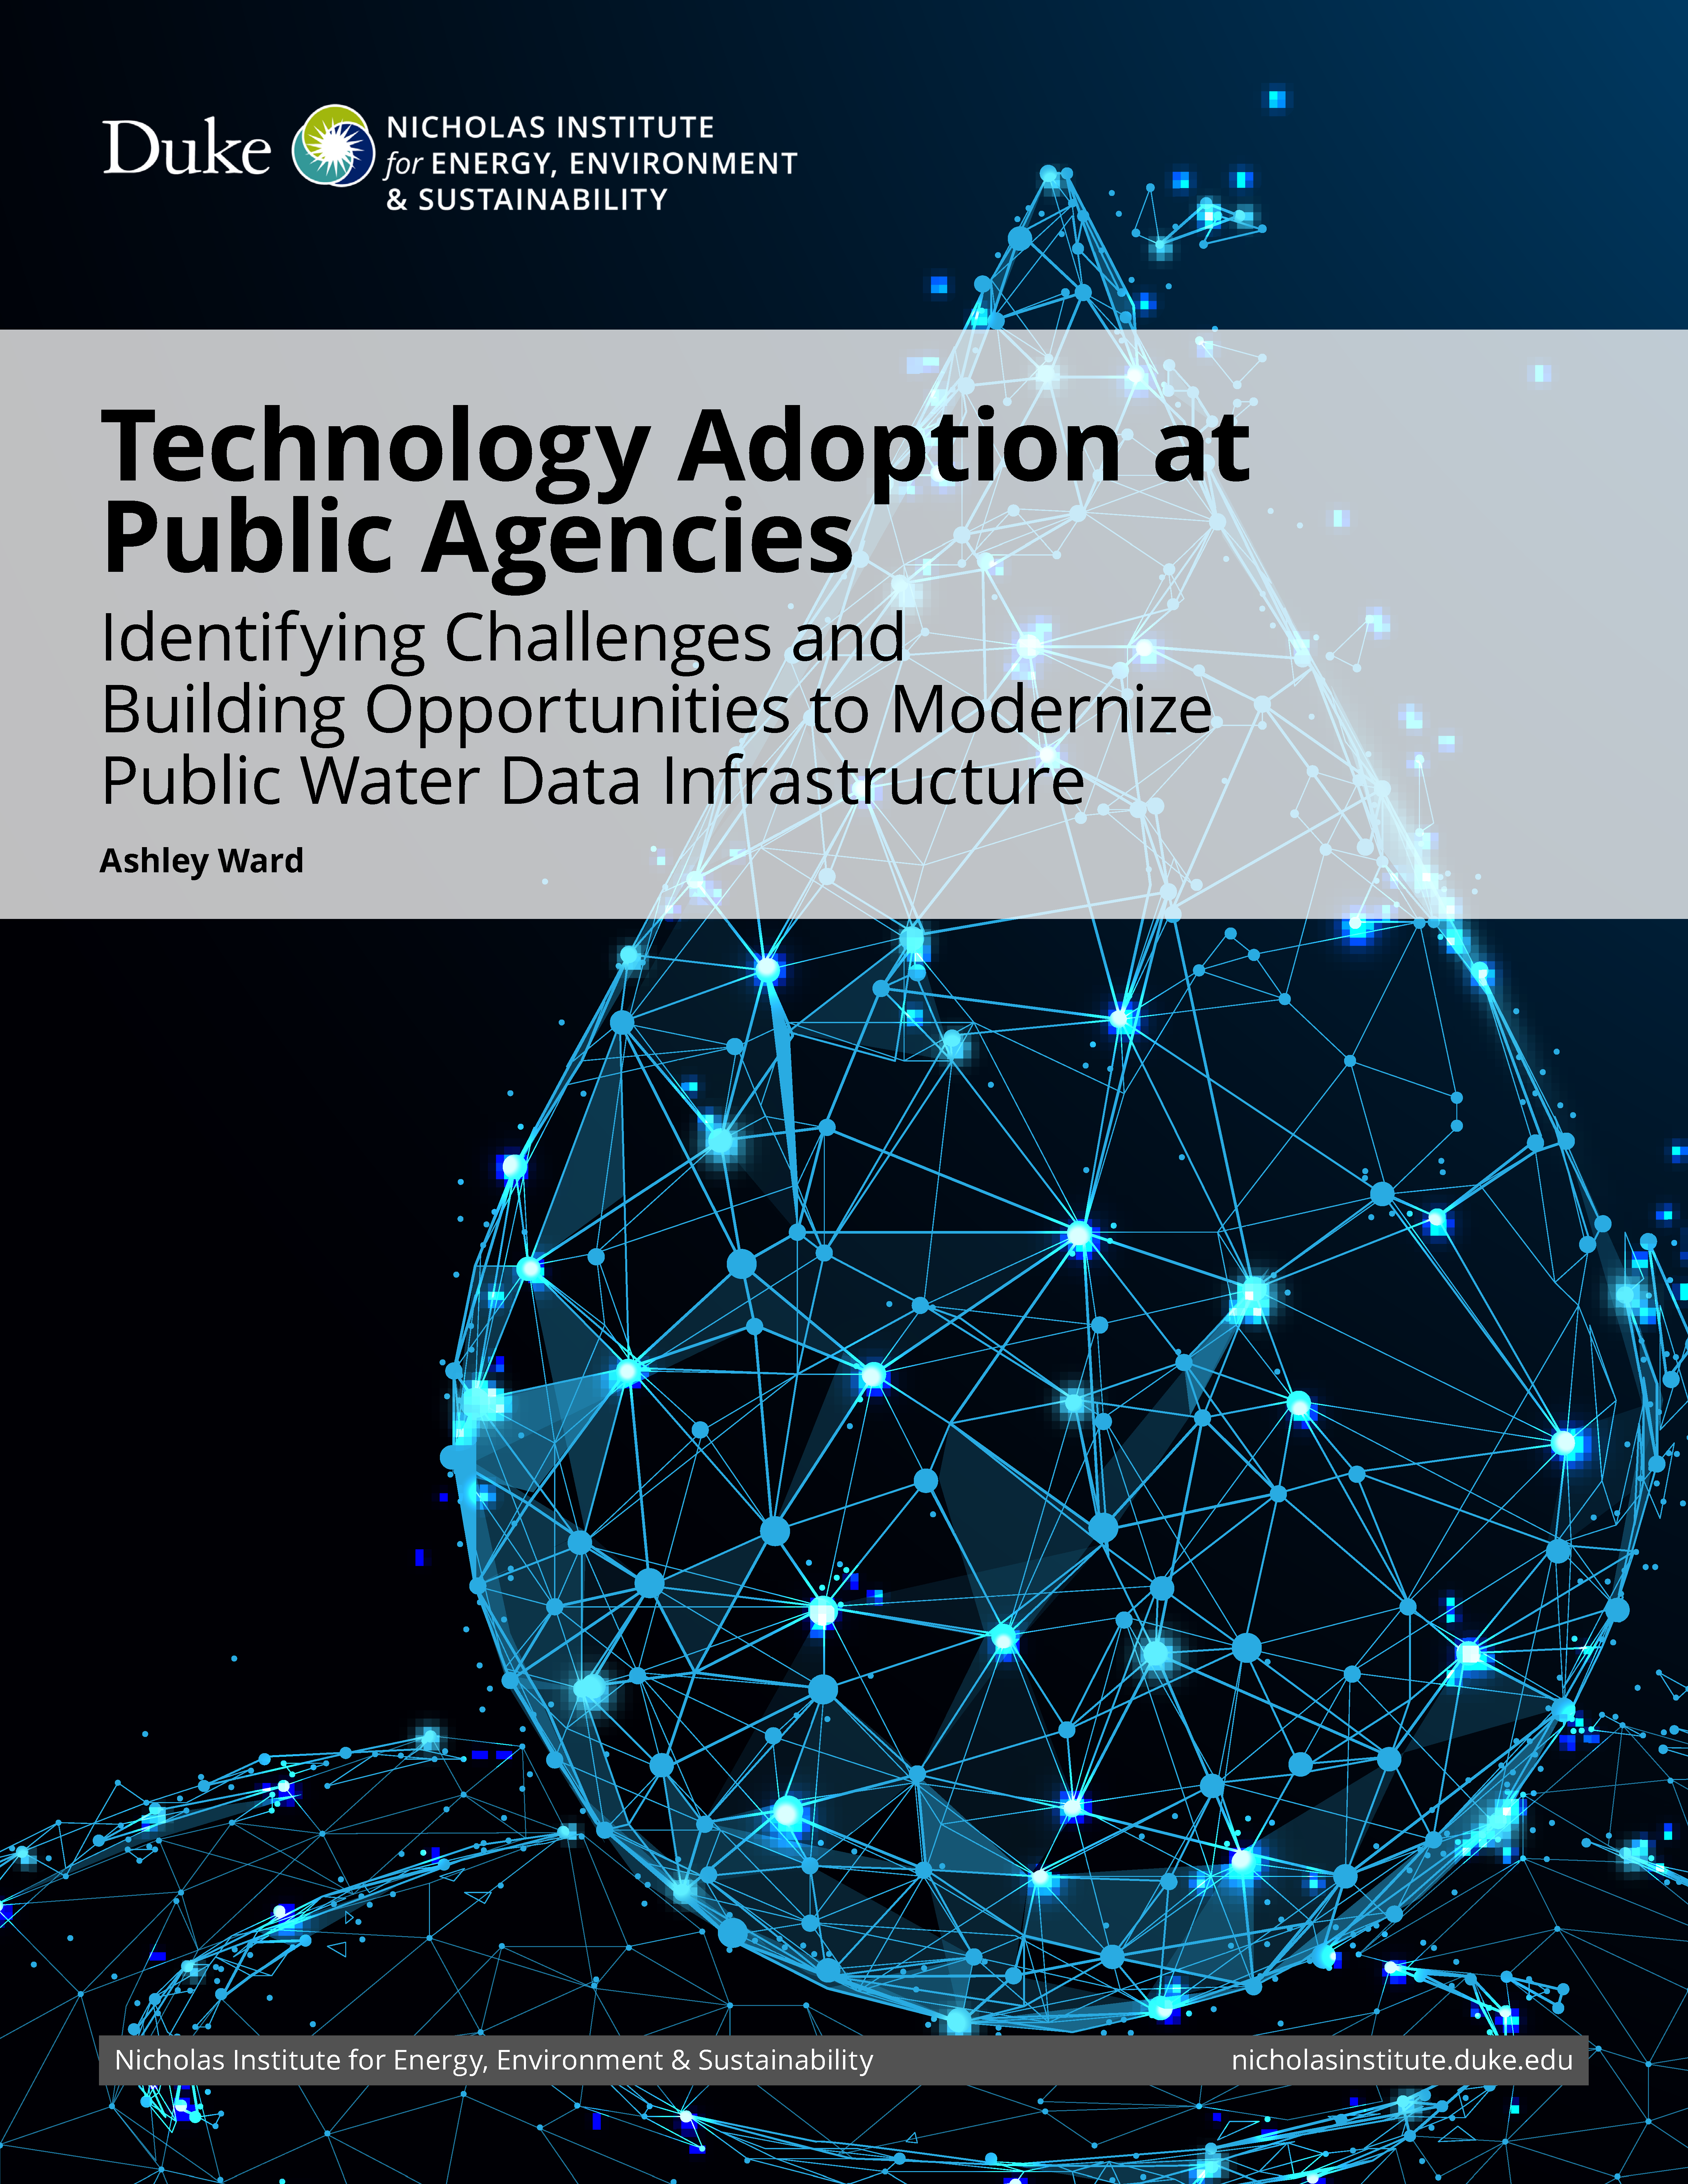 Technology Adoption at Public Agencies: Identifying Challenges and Building Opportunities to Modernize Public Water Data Infrastructure